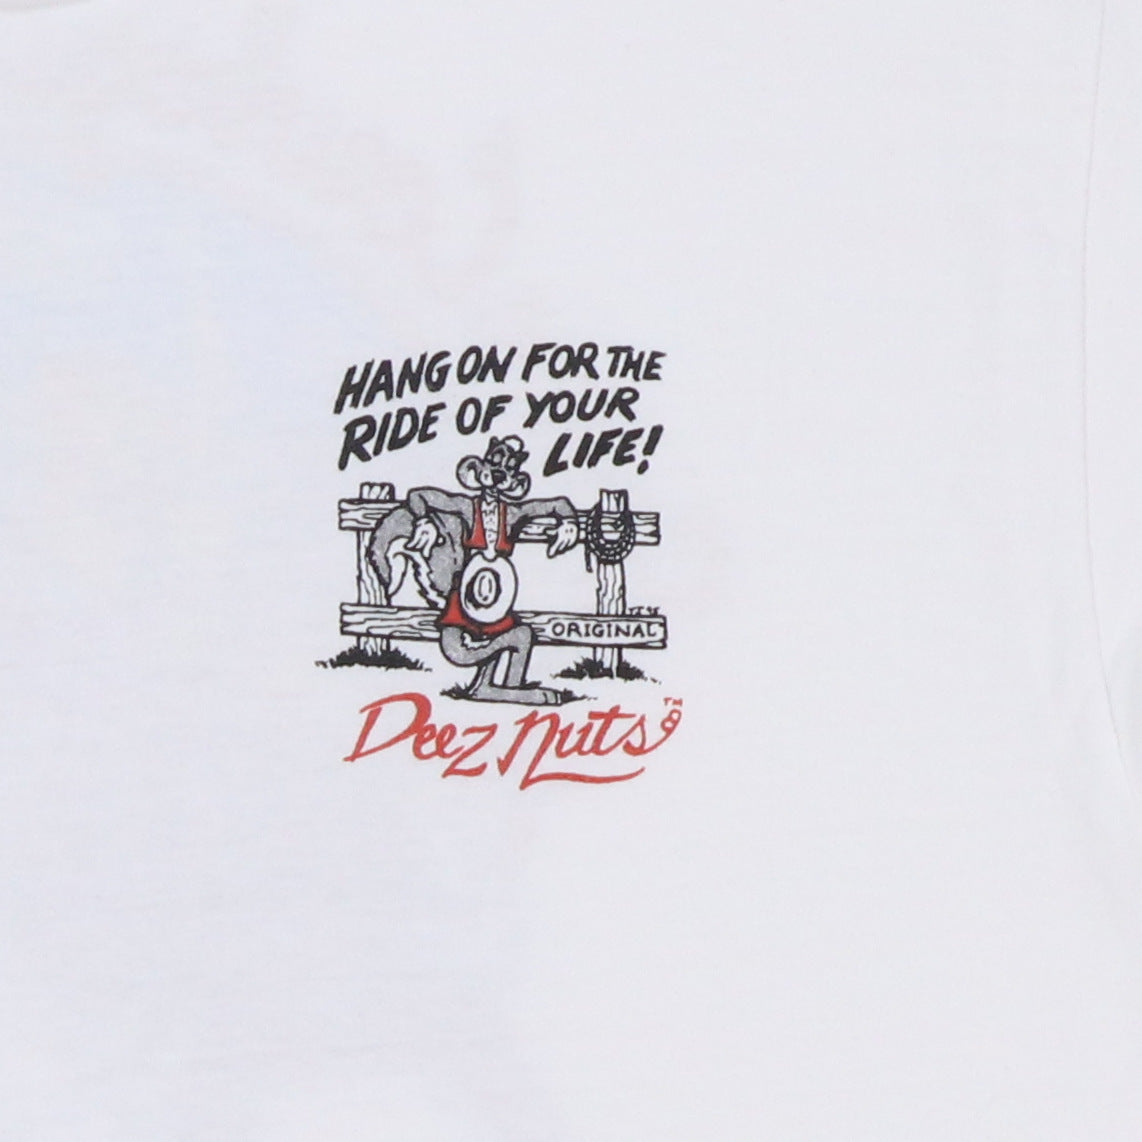 1995 Deez Nuts Can Last All Night Shirt